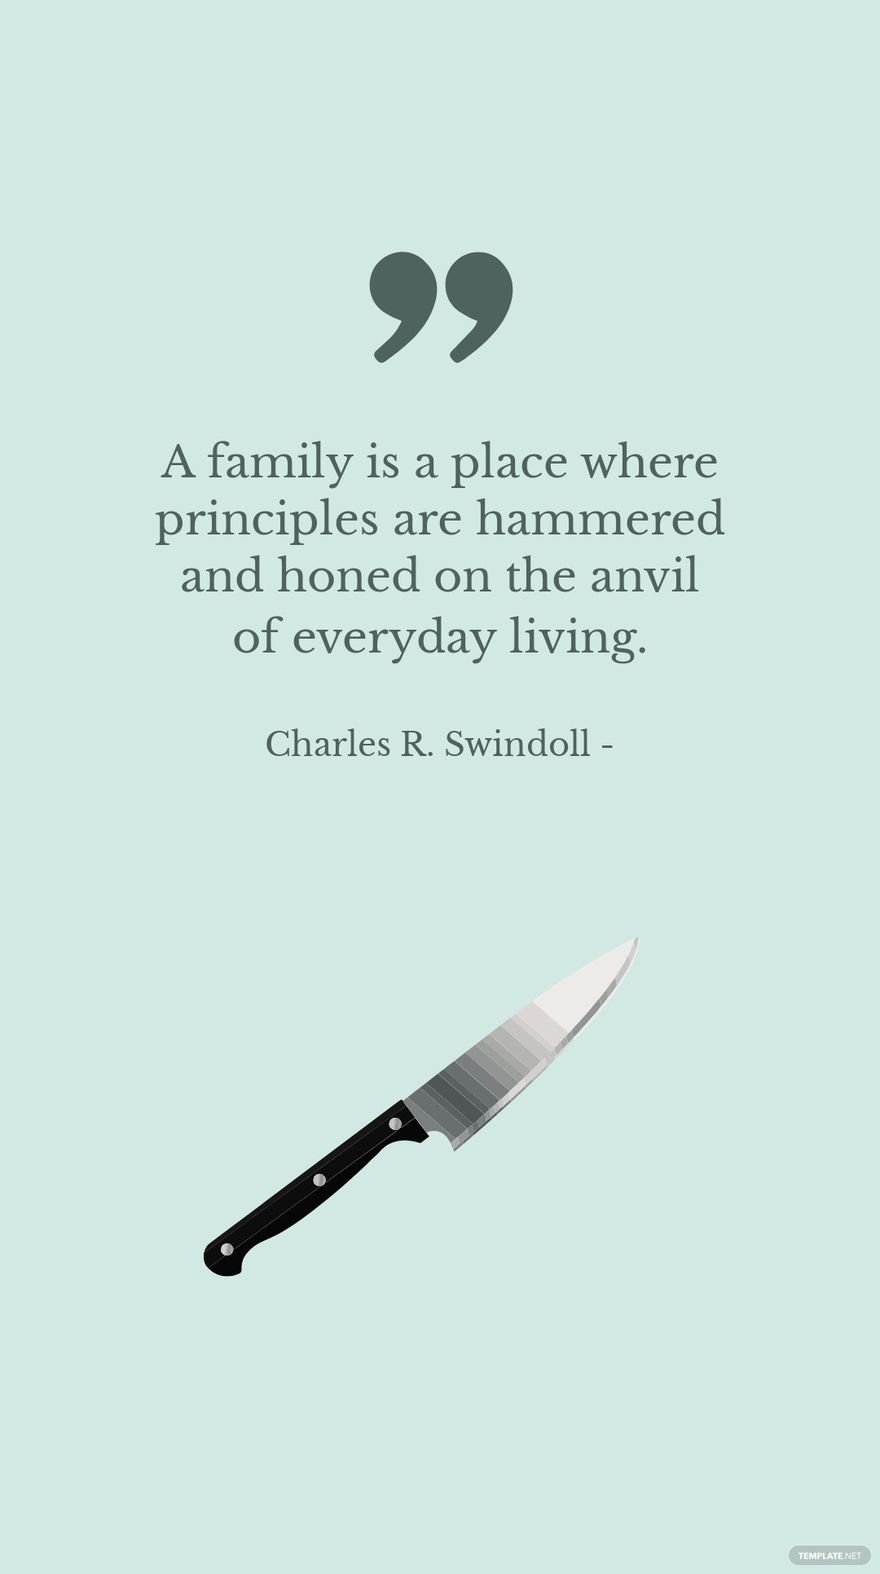 Charles R. Swindoll - A family is a place where principles are hammered and honed on the anvil of everyday living. in JPG